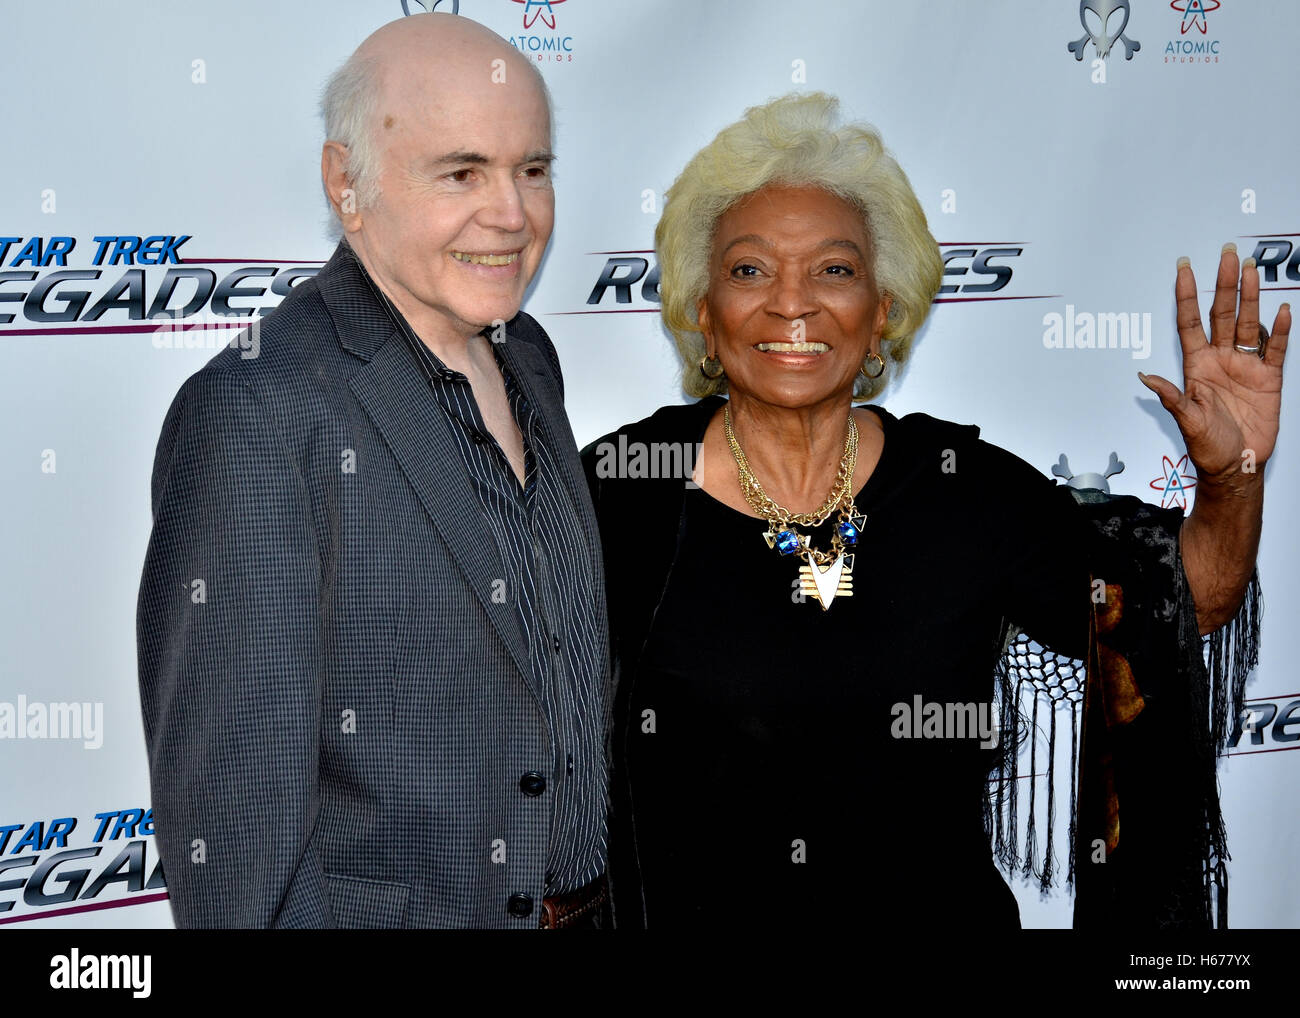 Walter Koenig and Nichelle Nichols arrive at the World Premiere of 'Star Trek: Renegades' at The Crest Theatre on August 1, 2015 in Westwood, California. Stock Photo